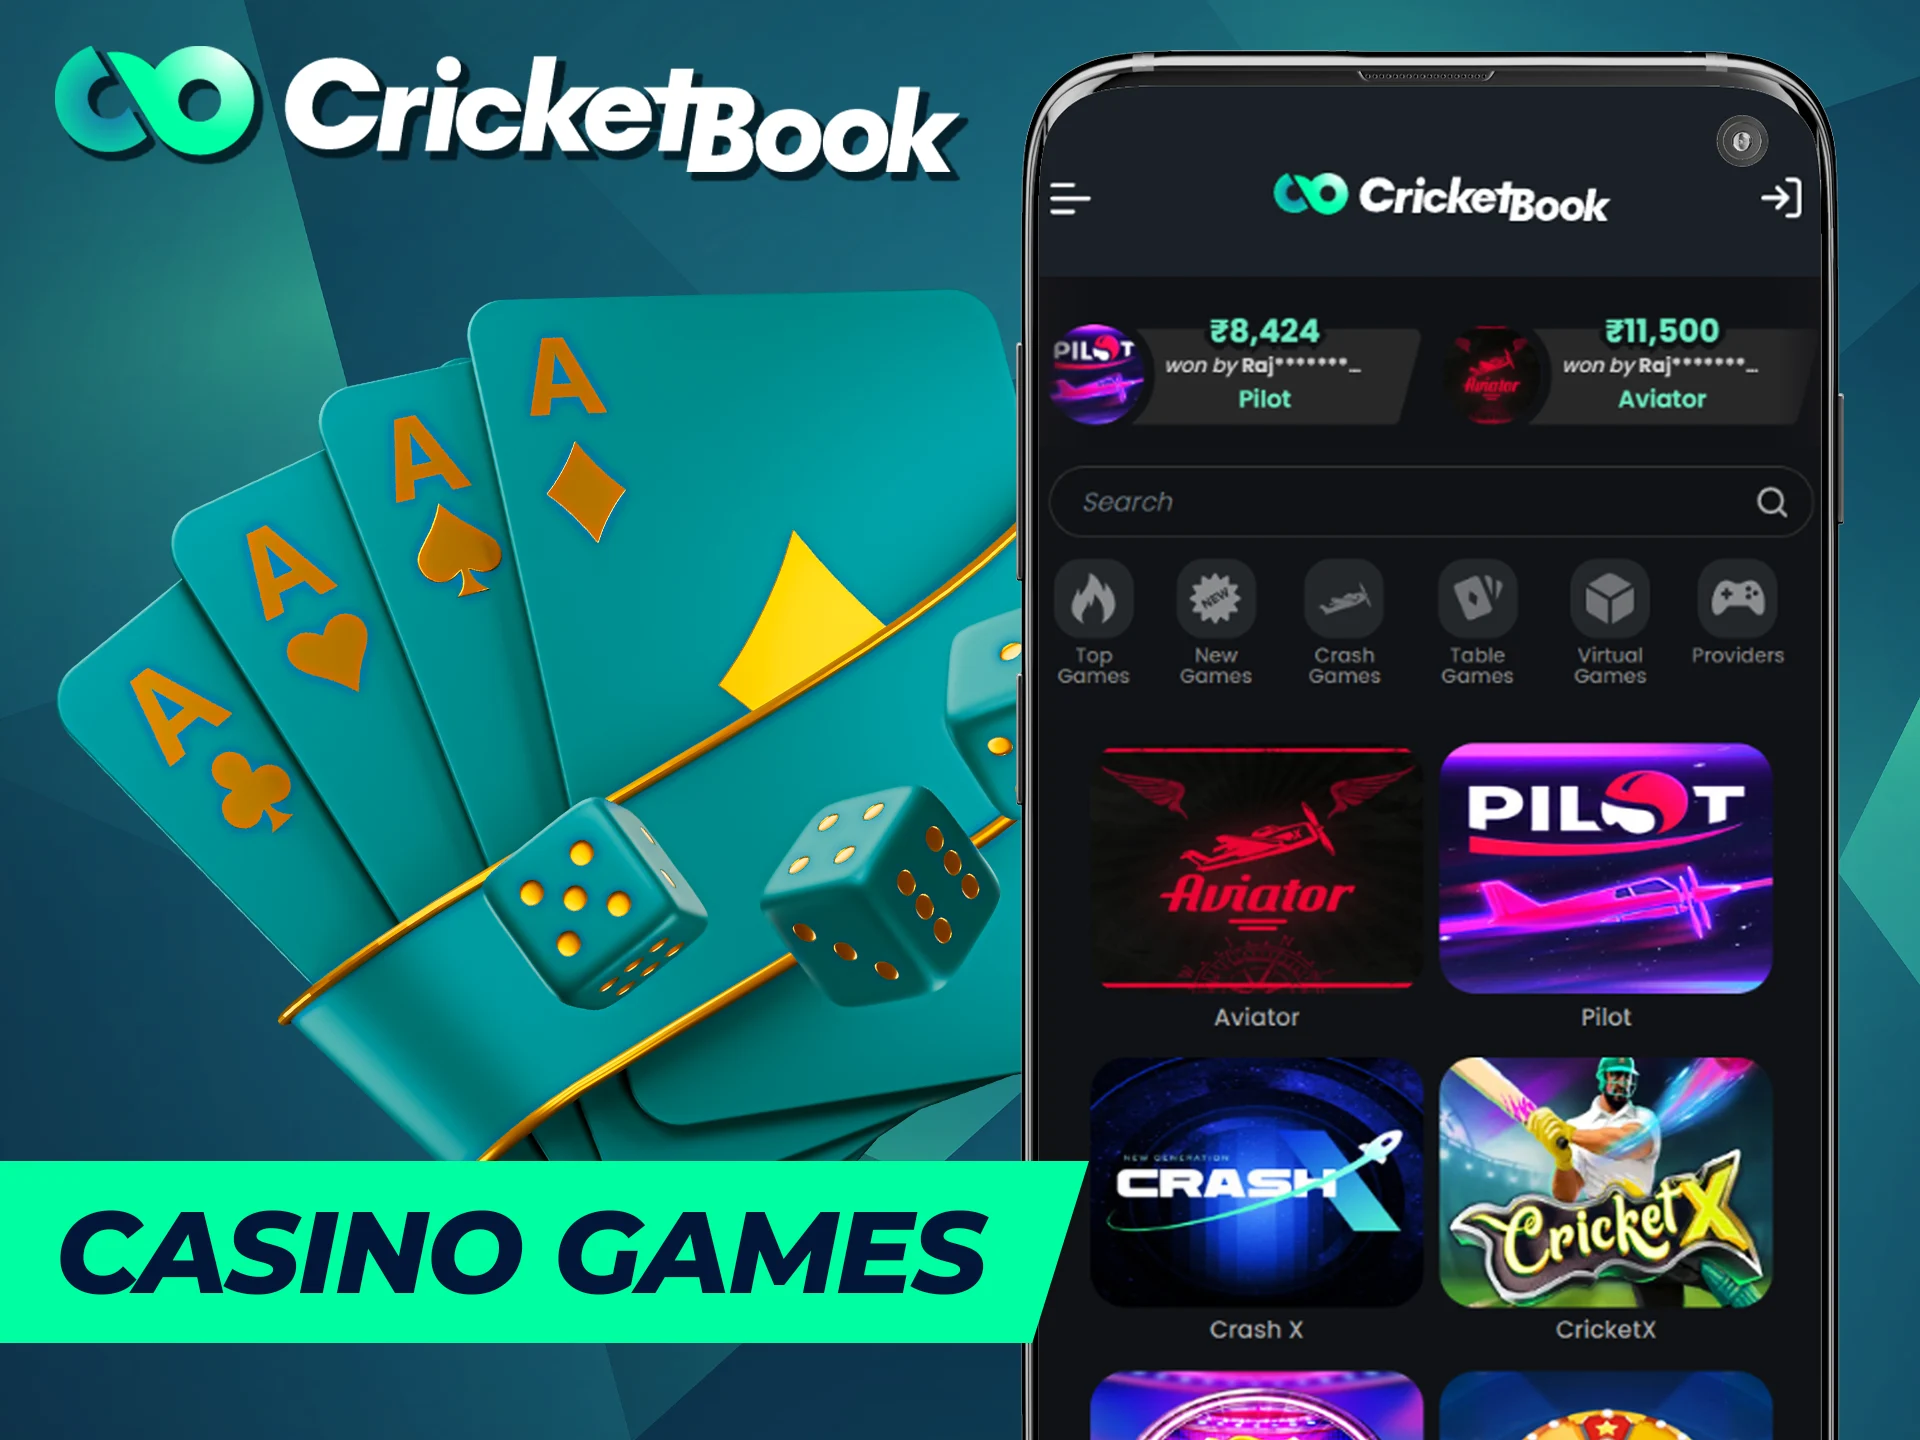 Slots, fruit machines and table games are waiting for you in the CricketBook app.